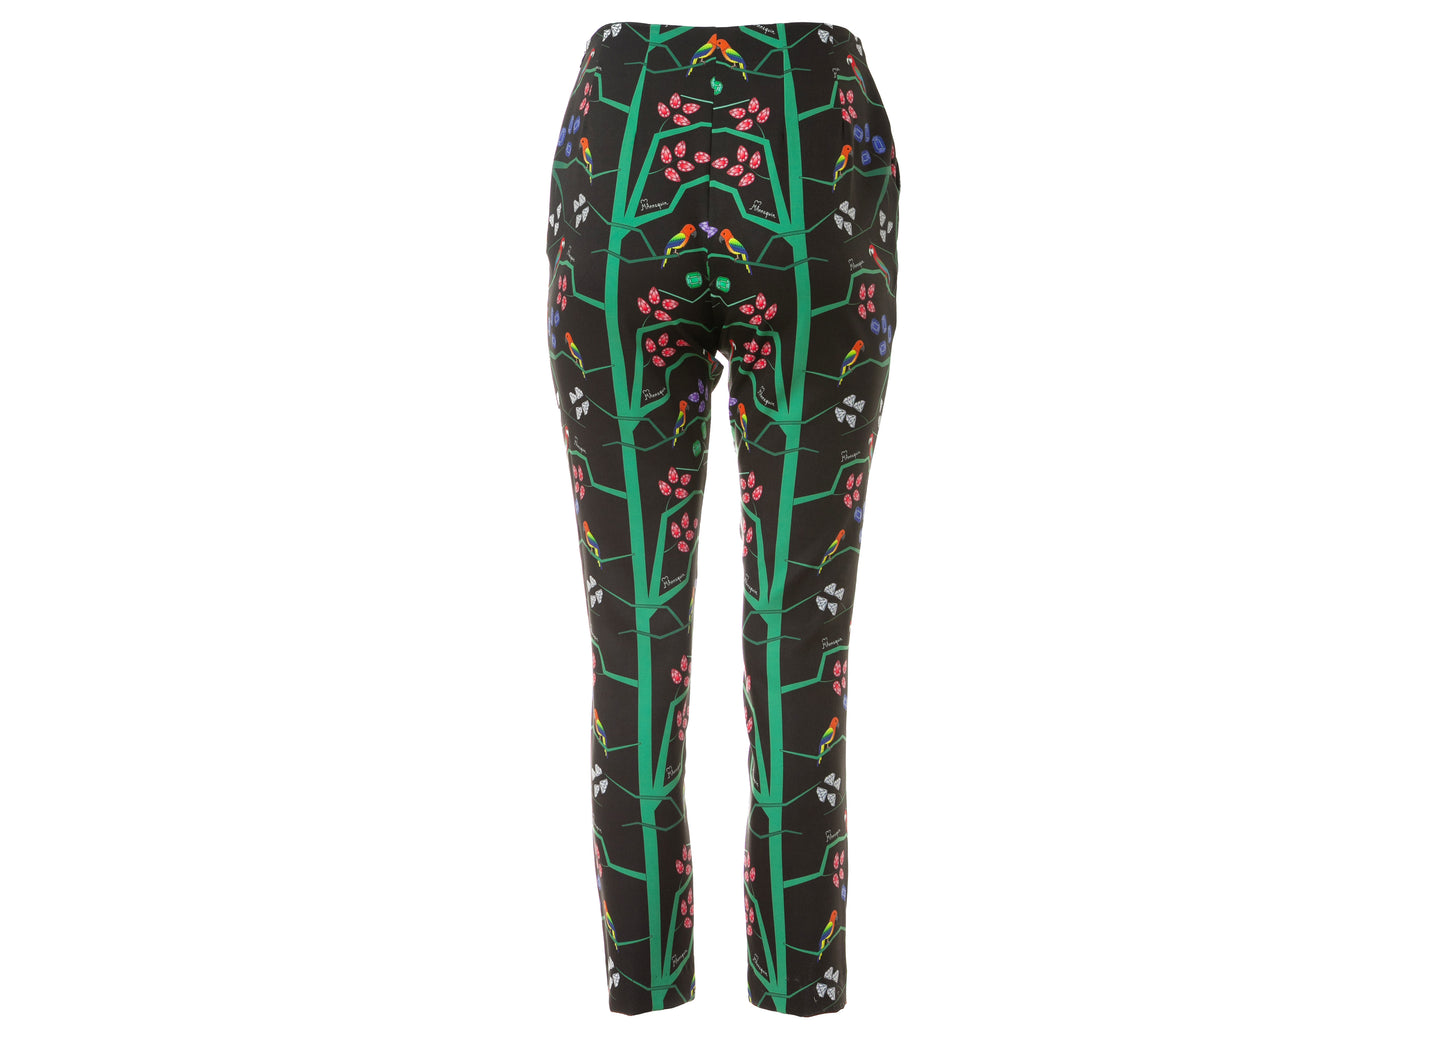 MAXINE TROUSERS-STRAIGHT LEG PRINTED TROUSERS